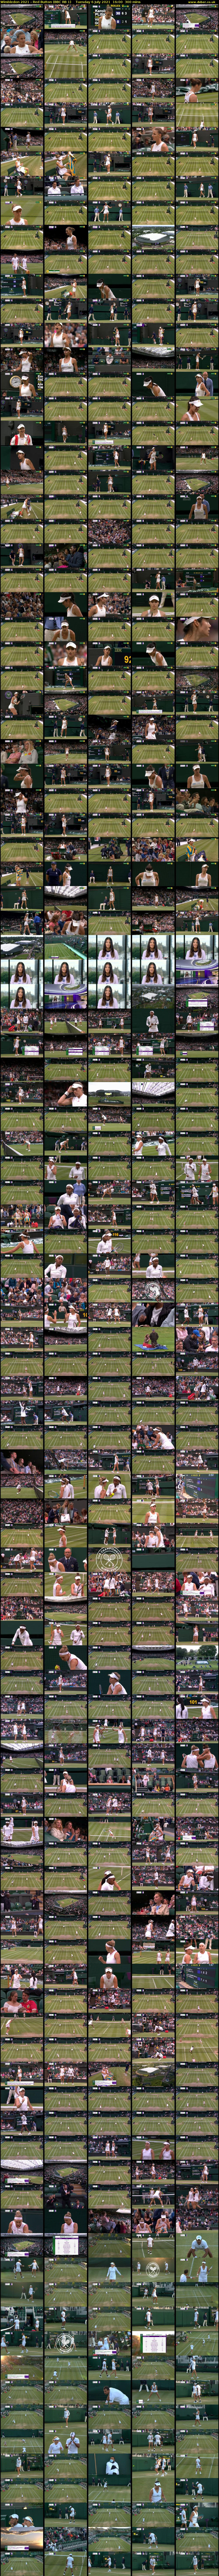 Wimbledon 2021 - Red Button (BBC RB 1) Tuesday 6 July 2021 16:00 - 21:00